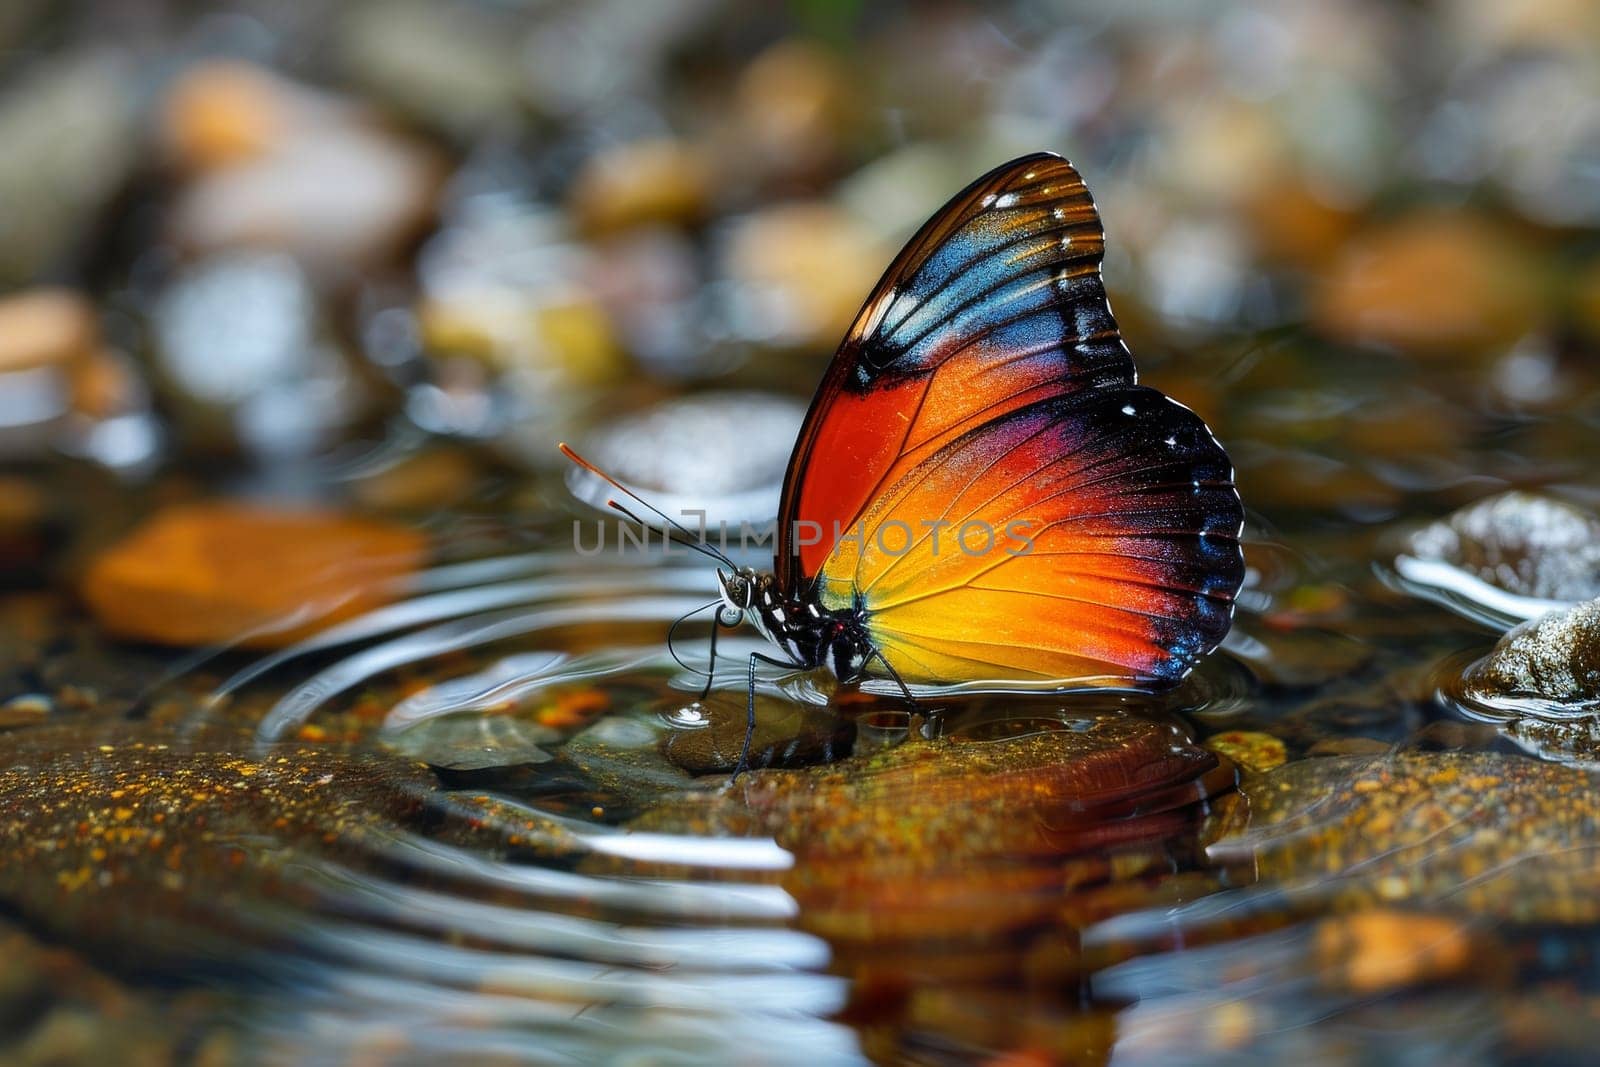 A colorful butterfly is floating on a body of water. The butterfly is surrounded by rocks and the water is splashing around it. The scene is peaceful and serene